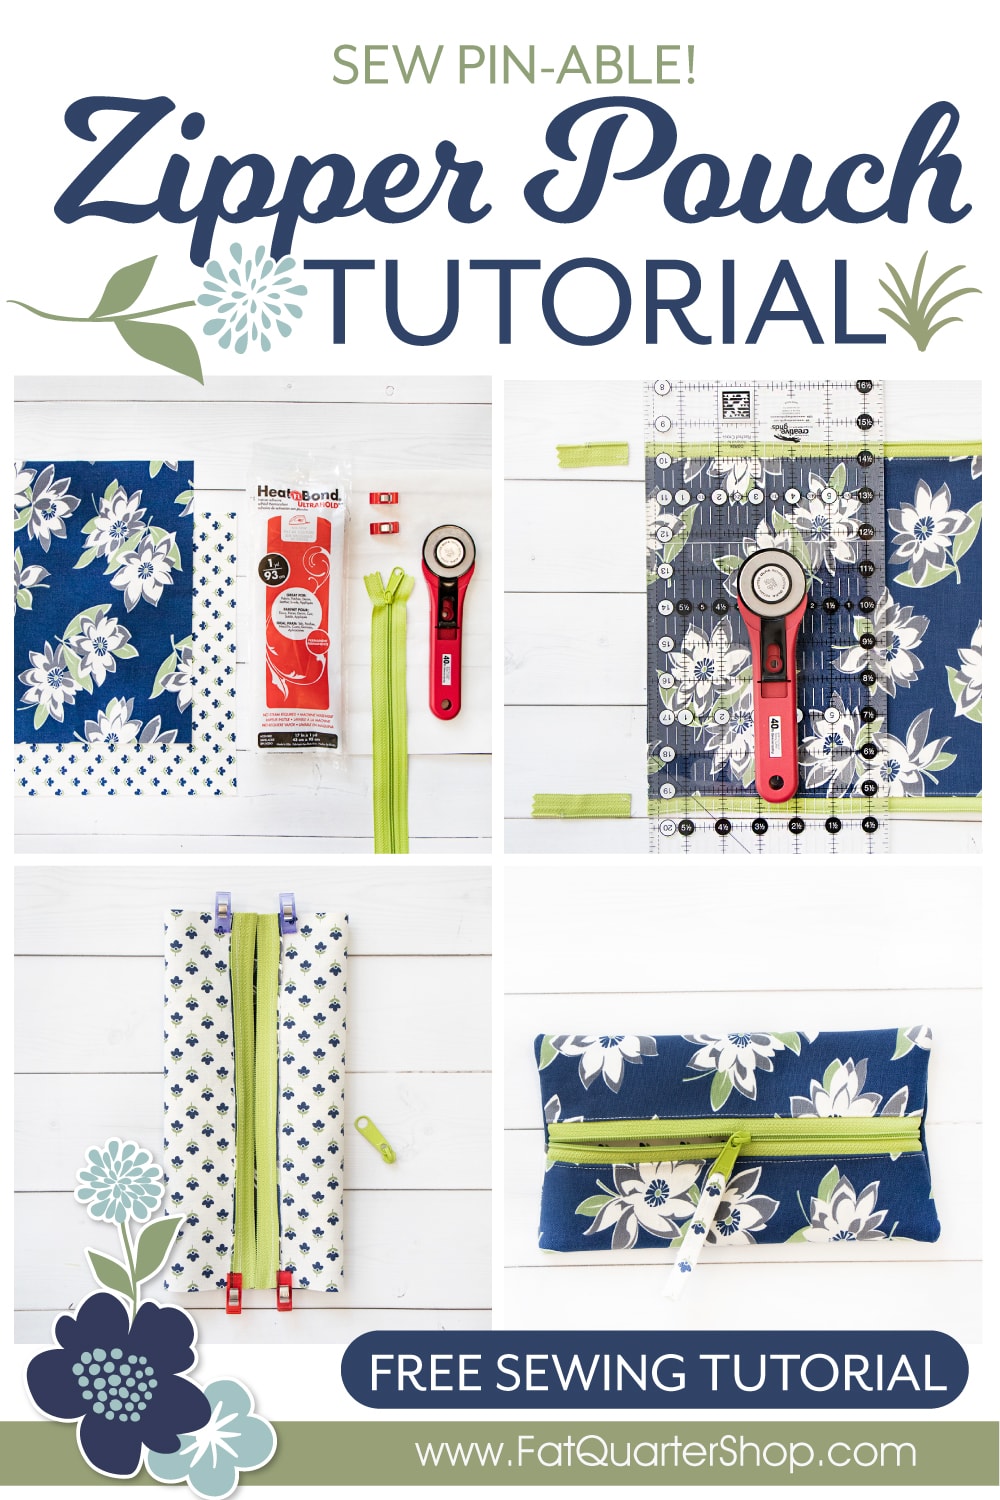 FREE Super Easy Zipper Pouch Tutorial - The Jolly Jabber Quilting Blog